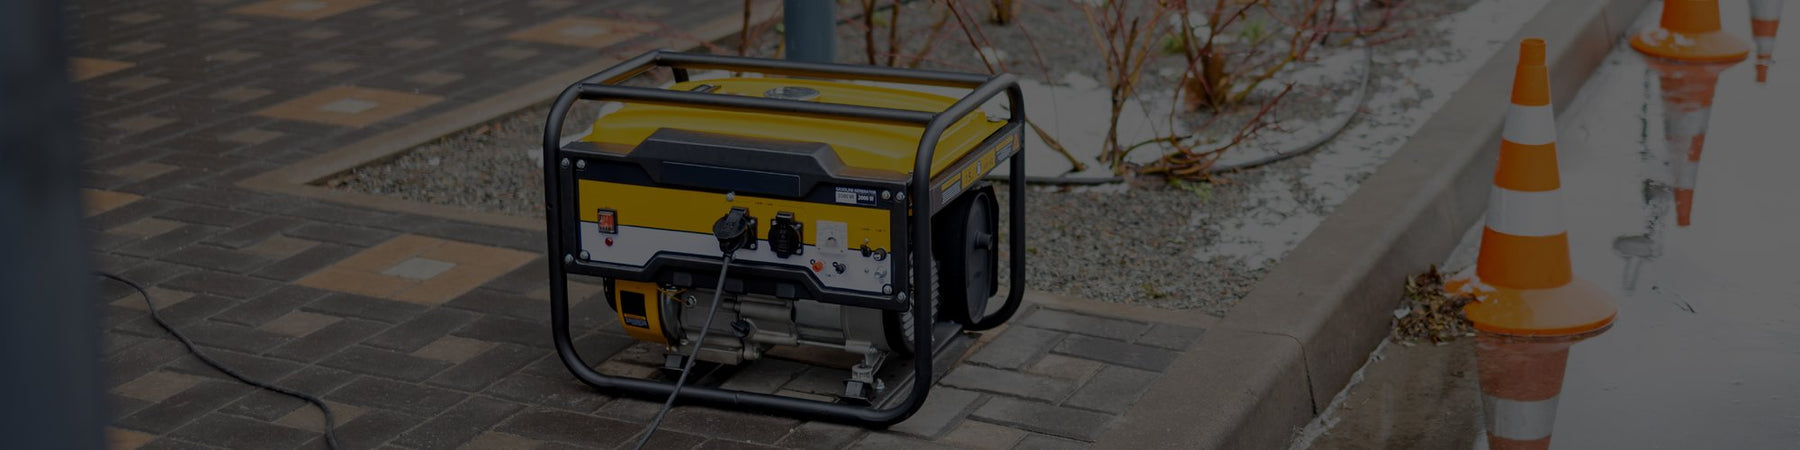 Gas vs Diesel Generators for Construction: Similarities and Differences